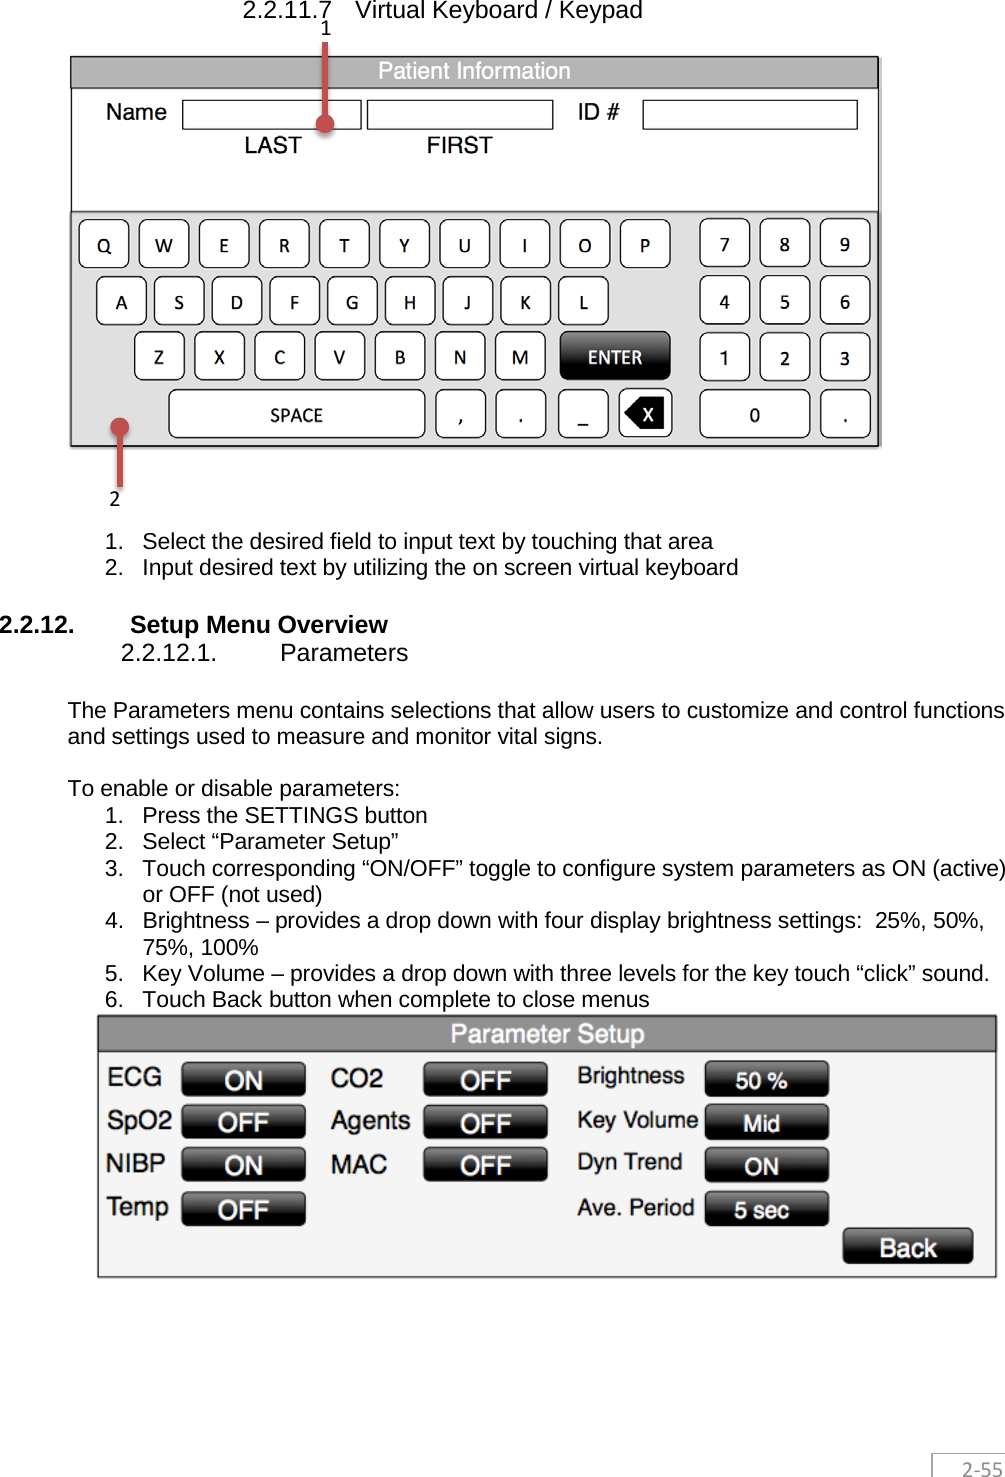  2-55  2.2.11.7 Virtual Keyboard / Keypad     1. Select the desired field to input text by touching that area 2. Input desired text by utilizing the on screen virtual keyboard 2.2.12. Setup Menu Overview 2.2.12.1. Parameters The Parameters menu contains selections that allow users to customize and control functions and settings used to measure and monitor vital signs.    To enable or disable parameters: 1. Press the SETTINGS button 2. Select “Parameter Setup”  3.  Touch corresponding “ON/OFF” toggle to configure system parameters as ON (active) or OFF (not used) 4. Brightness – provides a drop down with four display brightness settings:  25%, 50%, 75%, 100% 5. Key Volume – provides a drop down with three levels for the key touch “click” sound. 6. Touch Back button when complete to close menus     1 2 